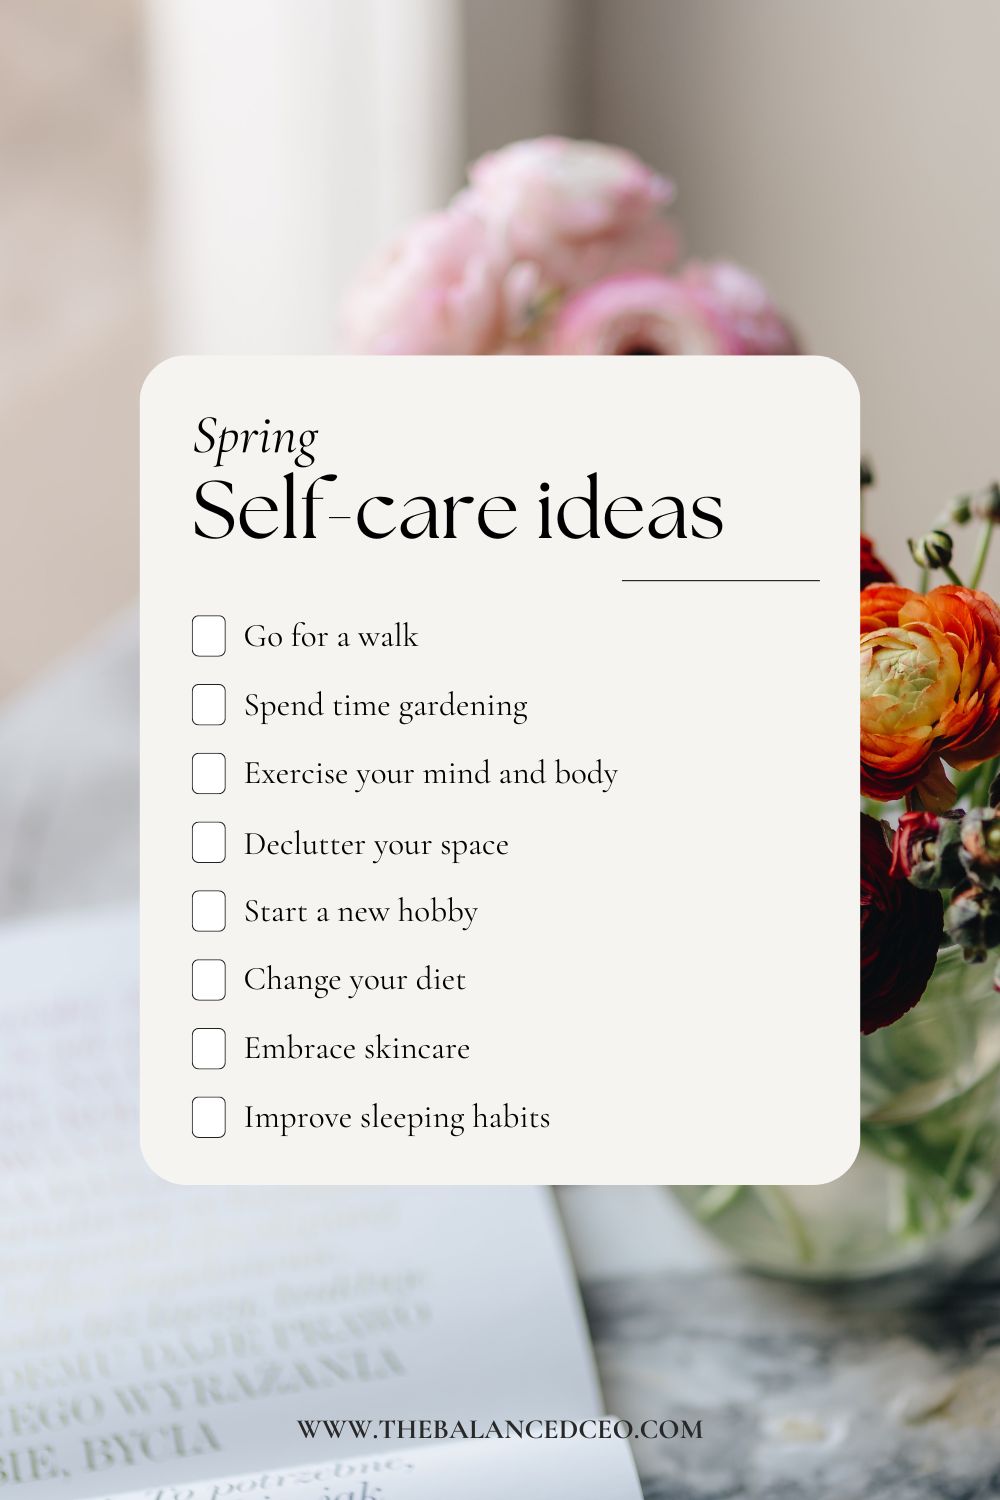 Spring Self-Care: Prioritize Your Mental Health This Season